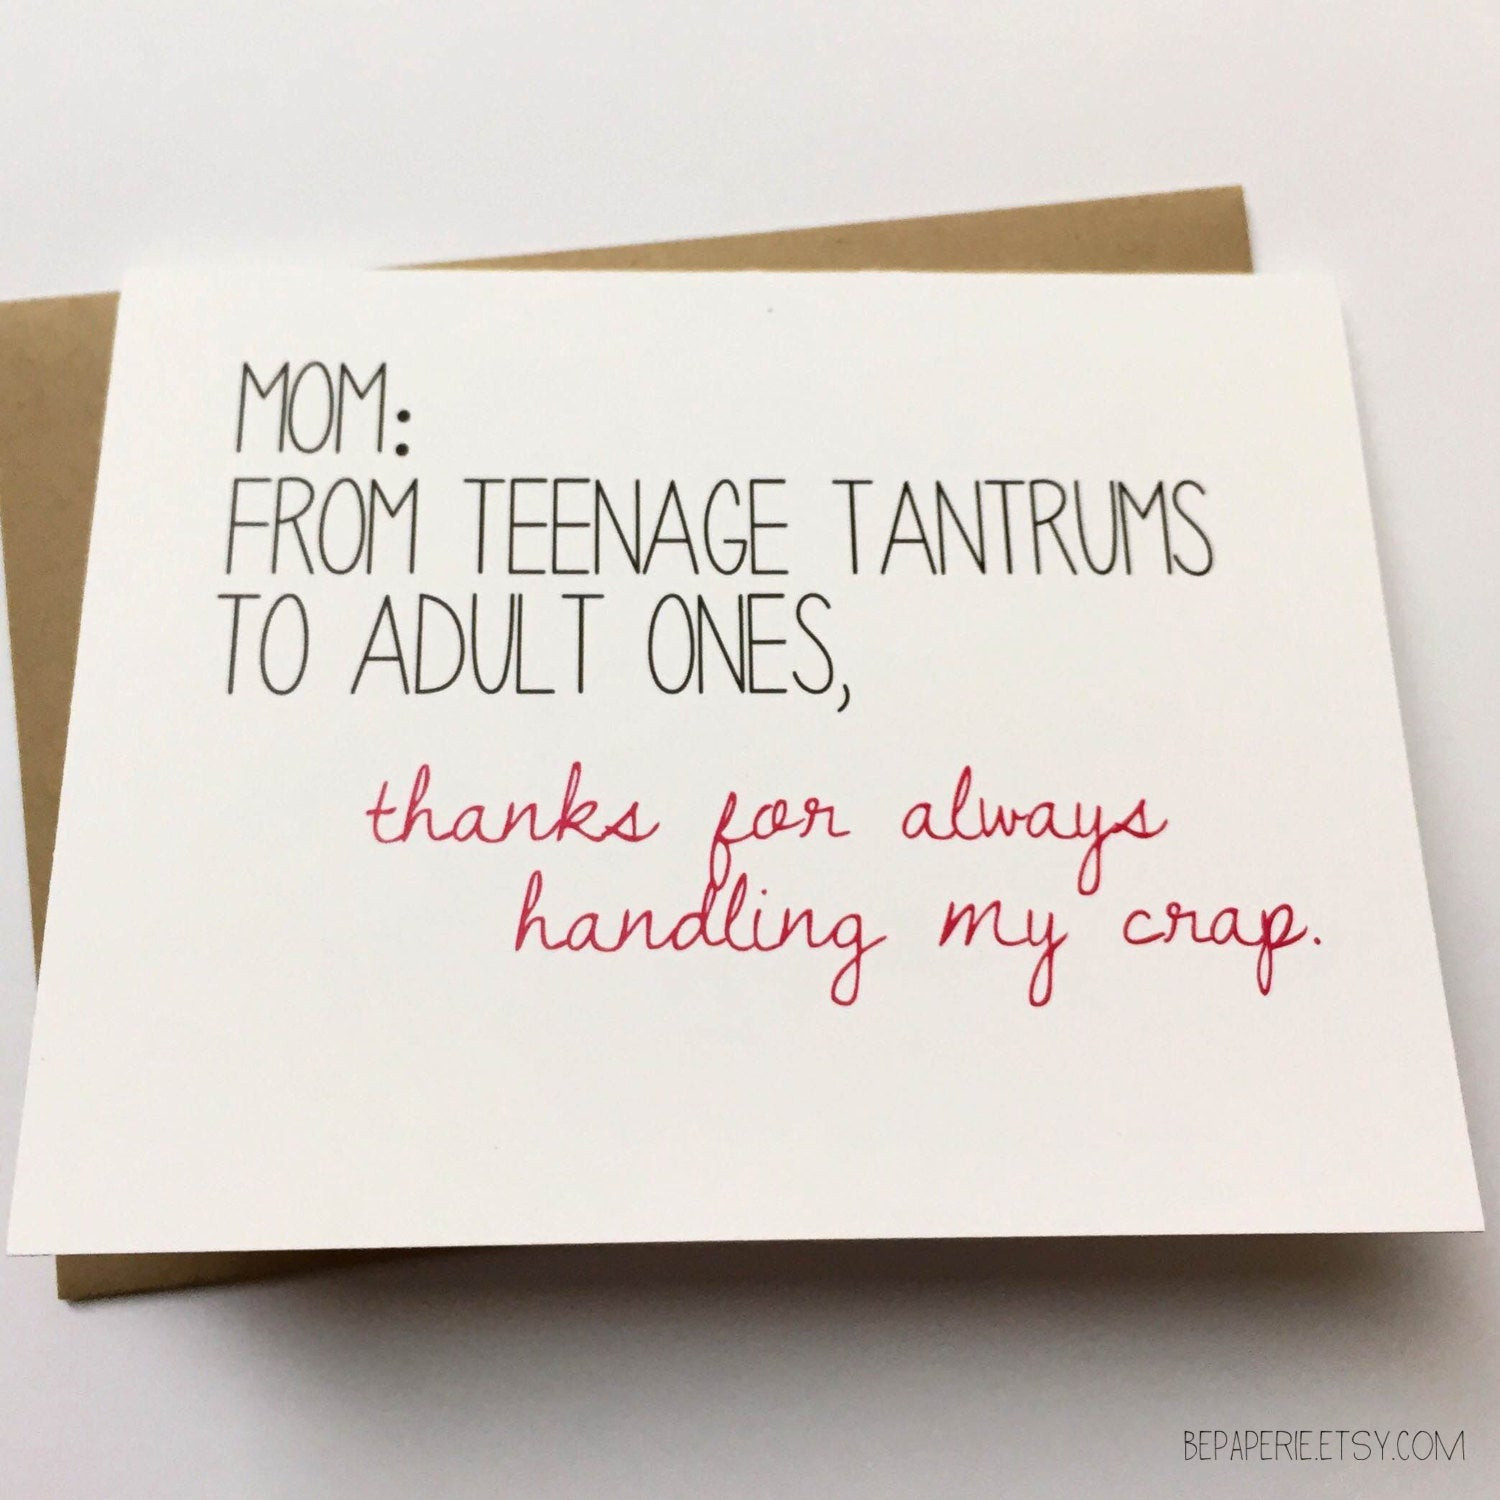 Funny Mom Birthday Quotes From Daughter
 Mom Card Funny Card for Mom Mom Birthday Card Funny